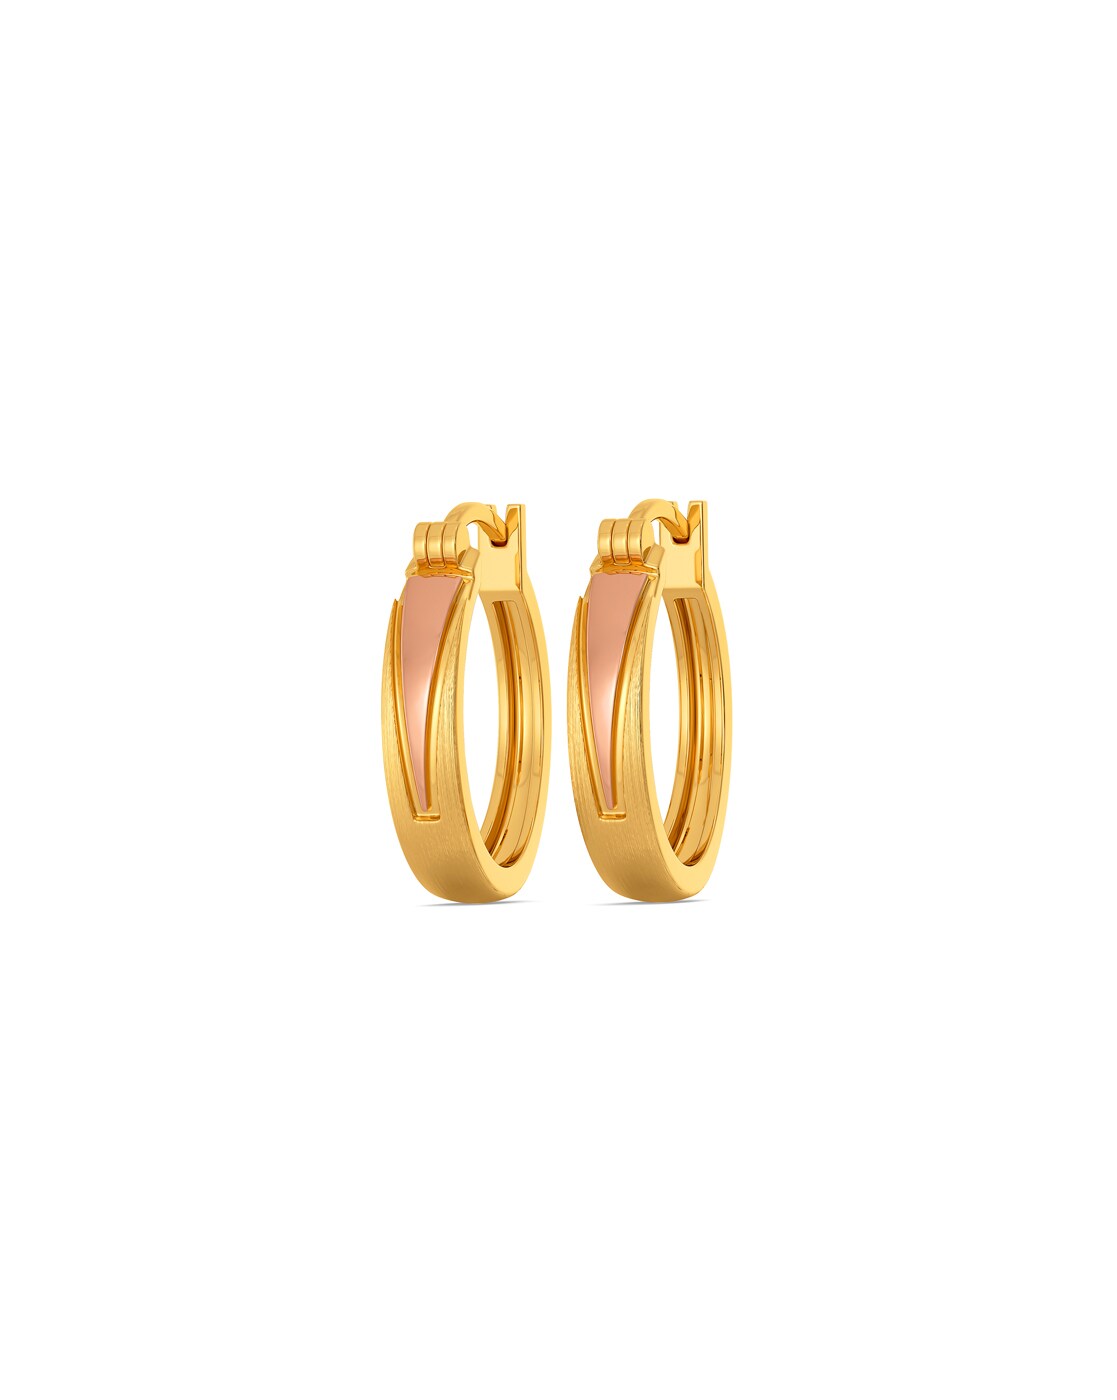 Premium quality earring for boys and mens wear for any occasion, gold  plated brass material, skin